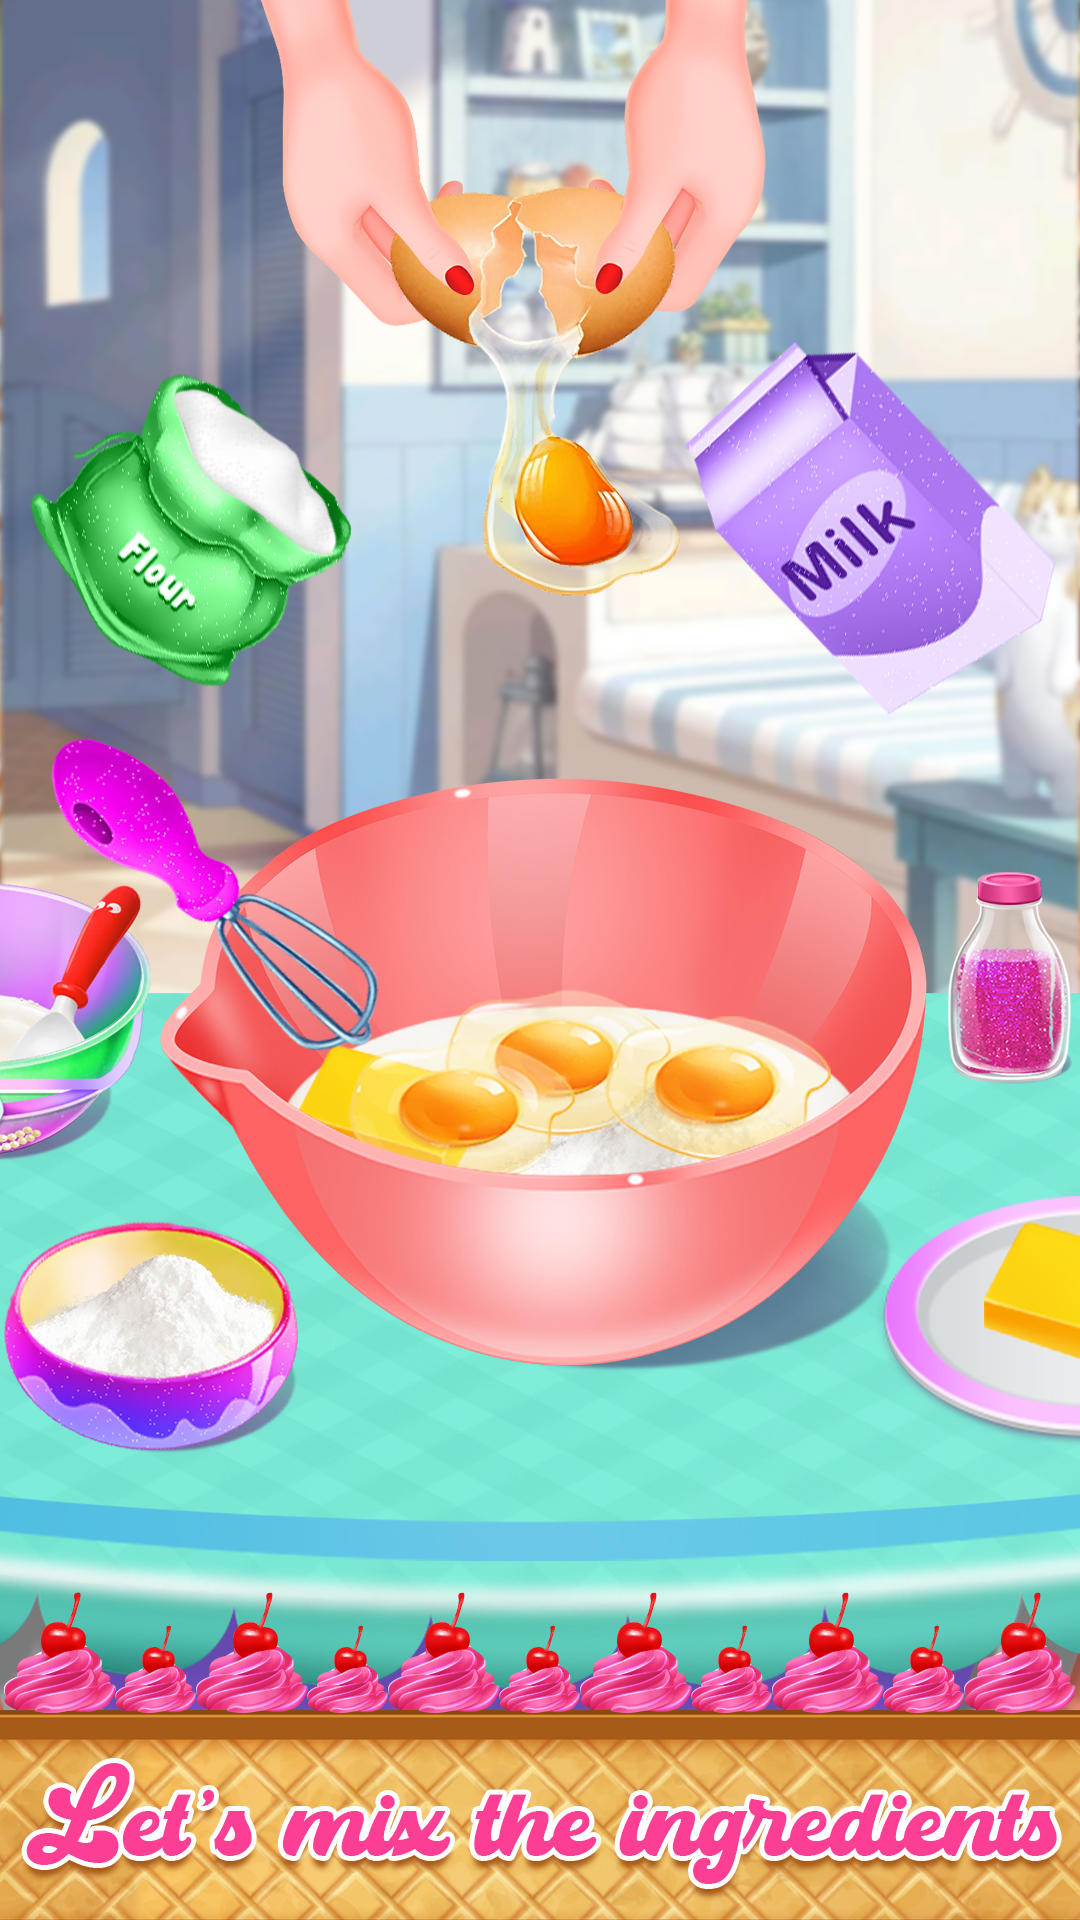 Cake Cooking Game - Play Fun Cakes Kids Game - My Bakery Empire Bake,  Decorate - YouTube